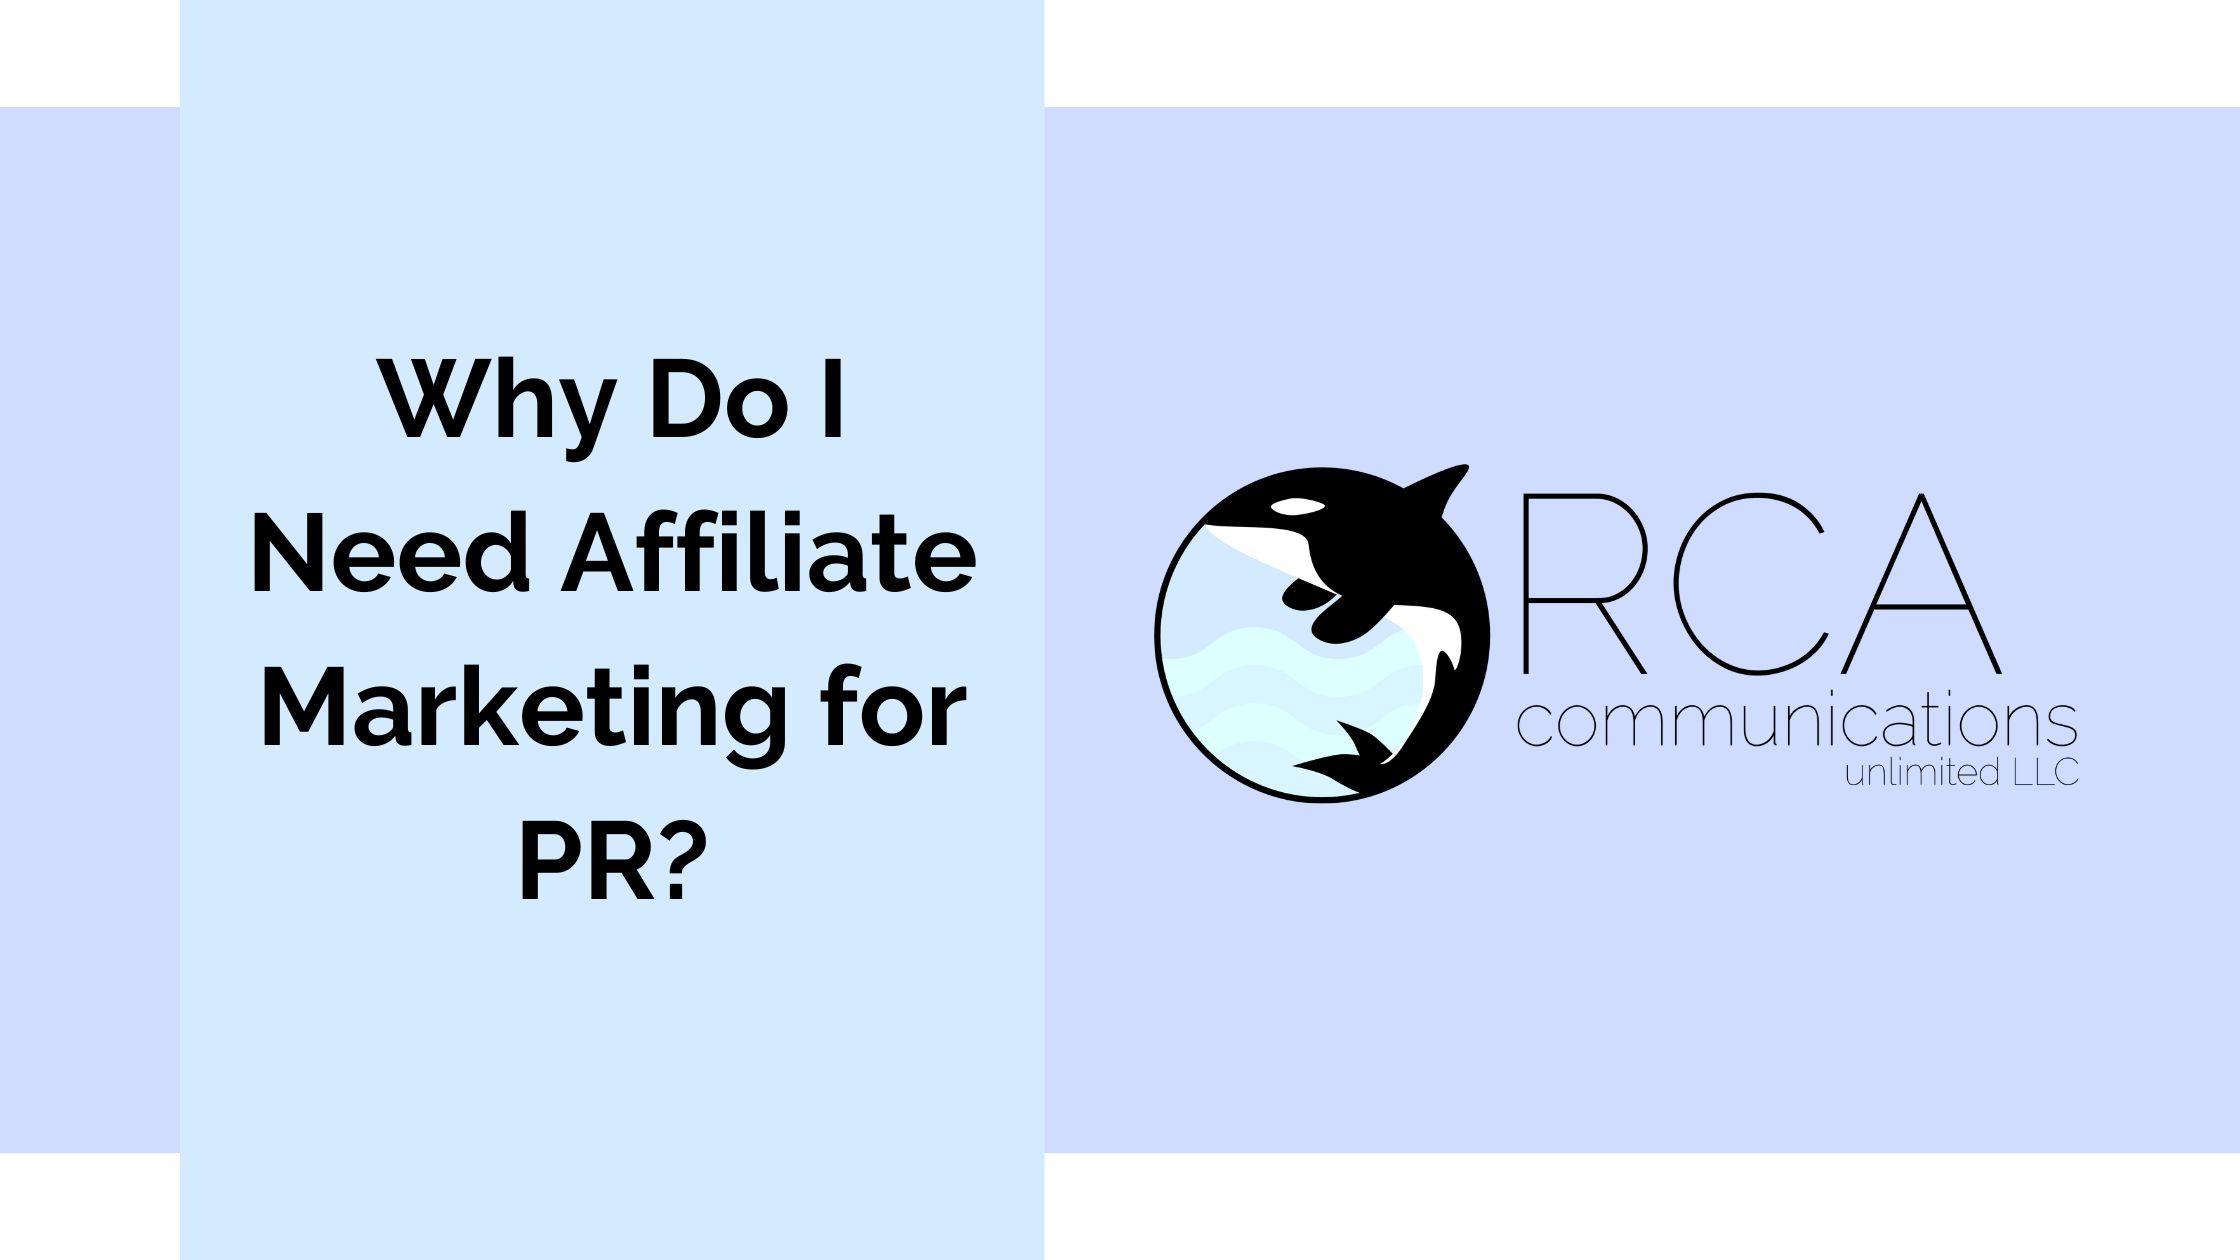 Why Do I Need Affiliate Marketing for PR?